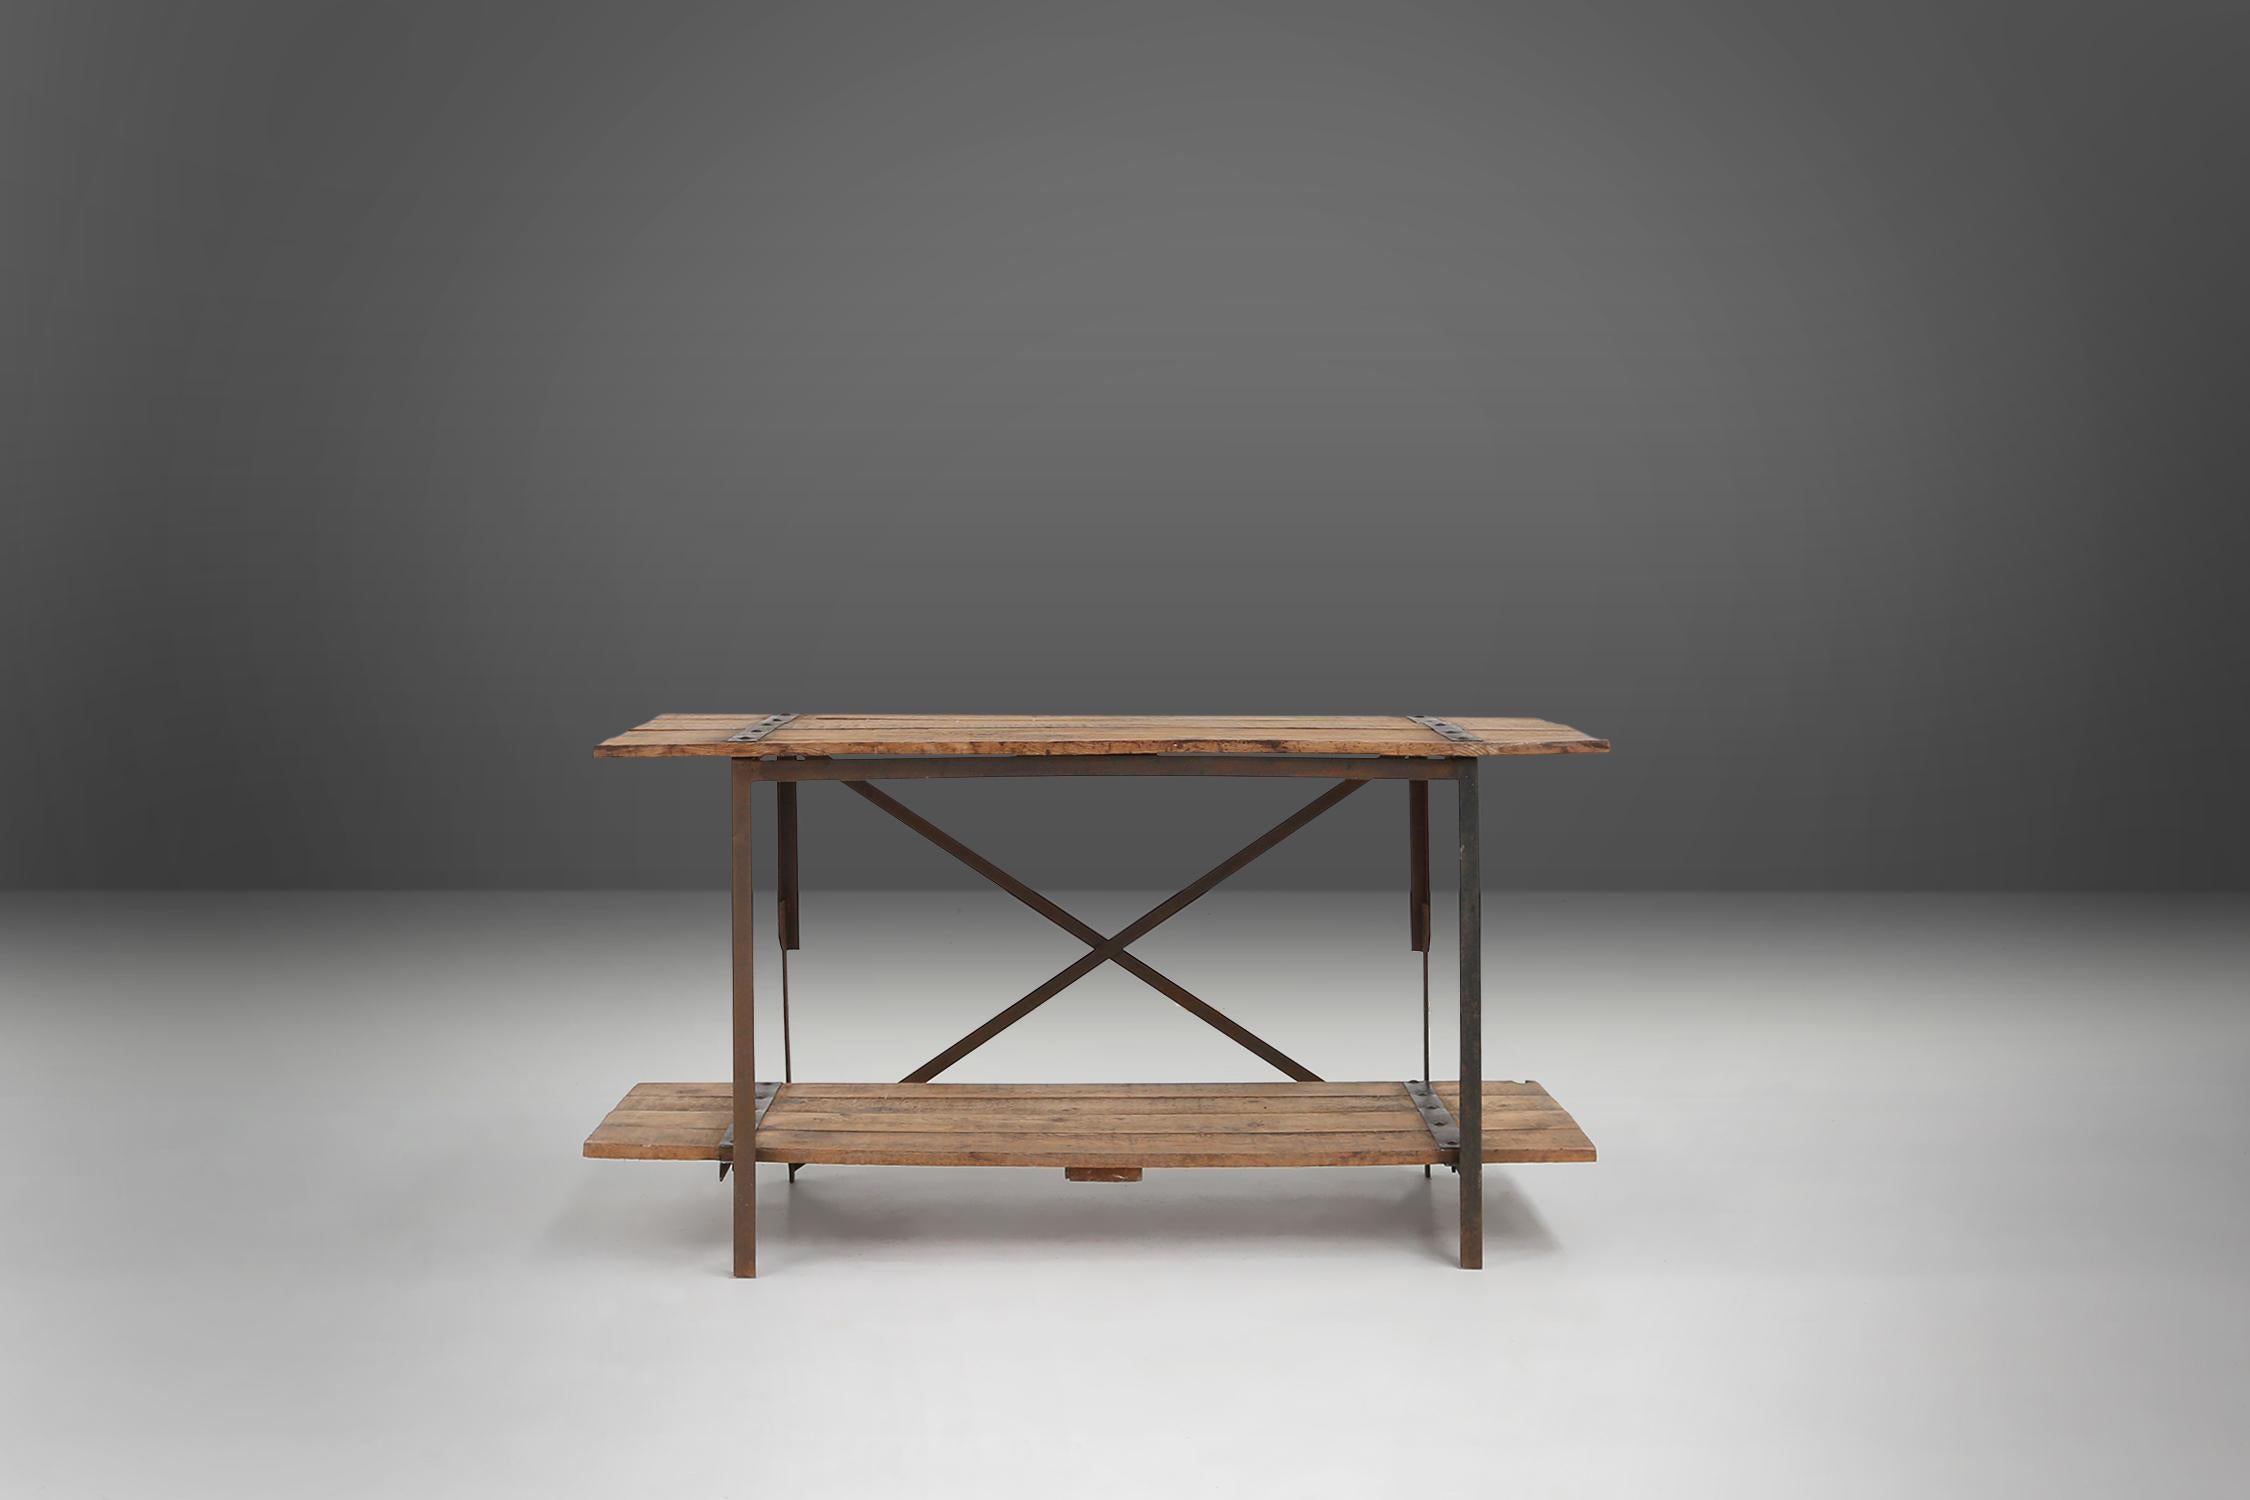 Belgium / 1920 /  2 side tables / wood and metal / industrial

Two sturdy industrial side or work tables with tough metal details on the wooden top, made in Belgium around 1920. These versatile tables have a removable platform similar to the top on